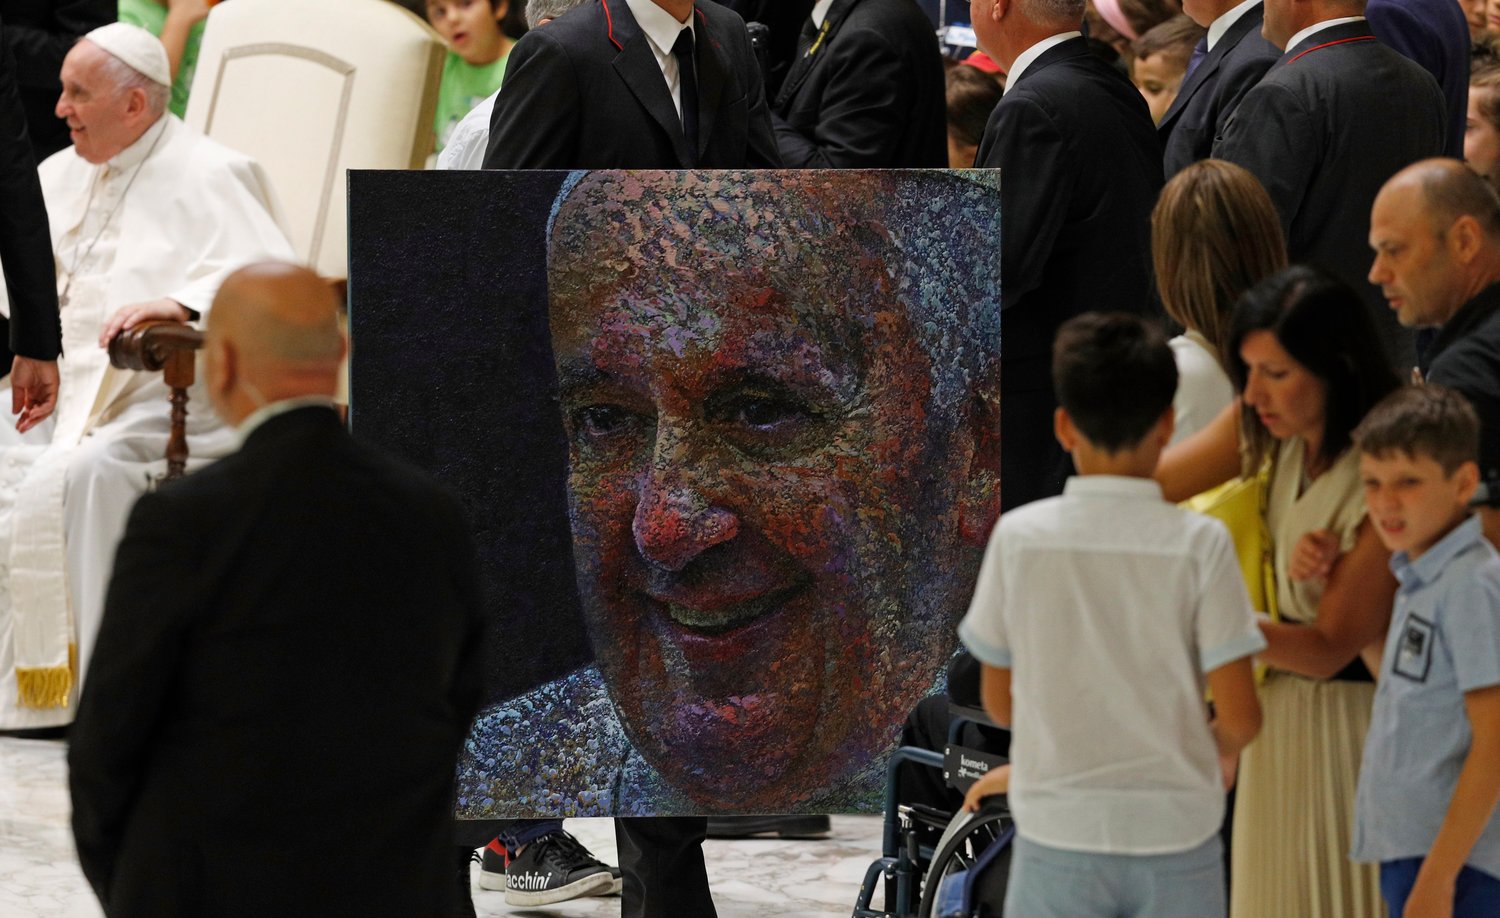 An image of Pope Francis is seen after being presented to the pope during his general audience in the Paul VI hall at the Vatican Aug. 3.